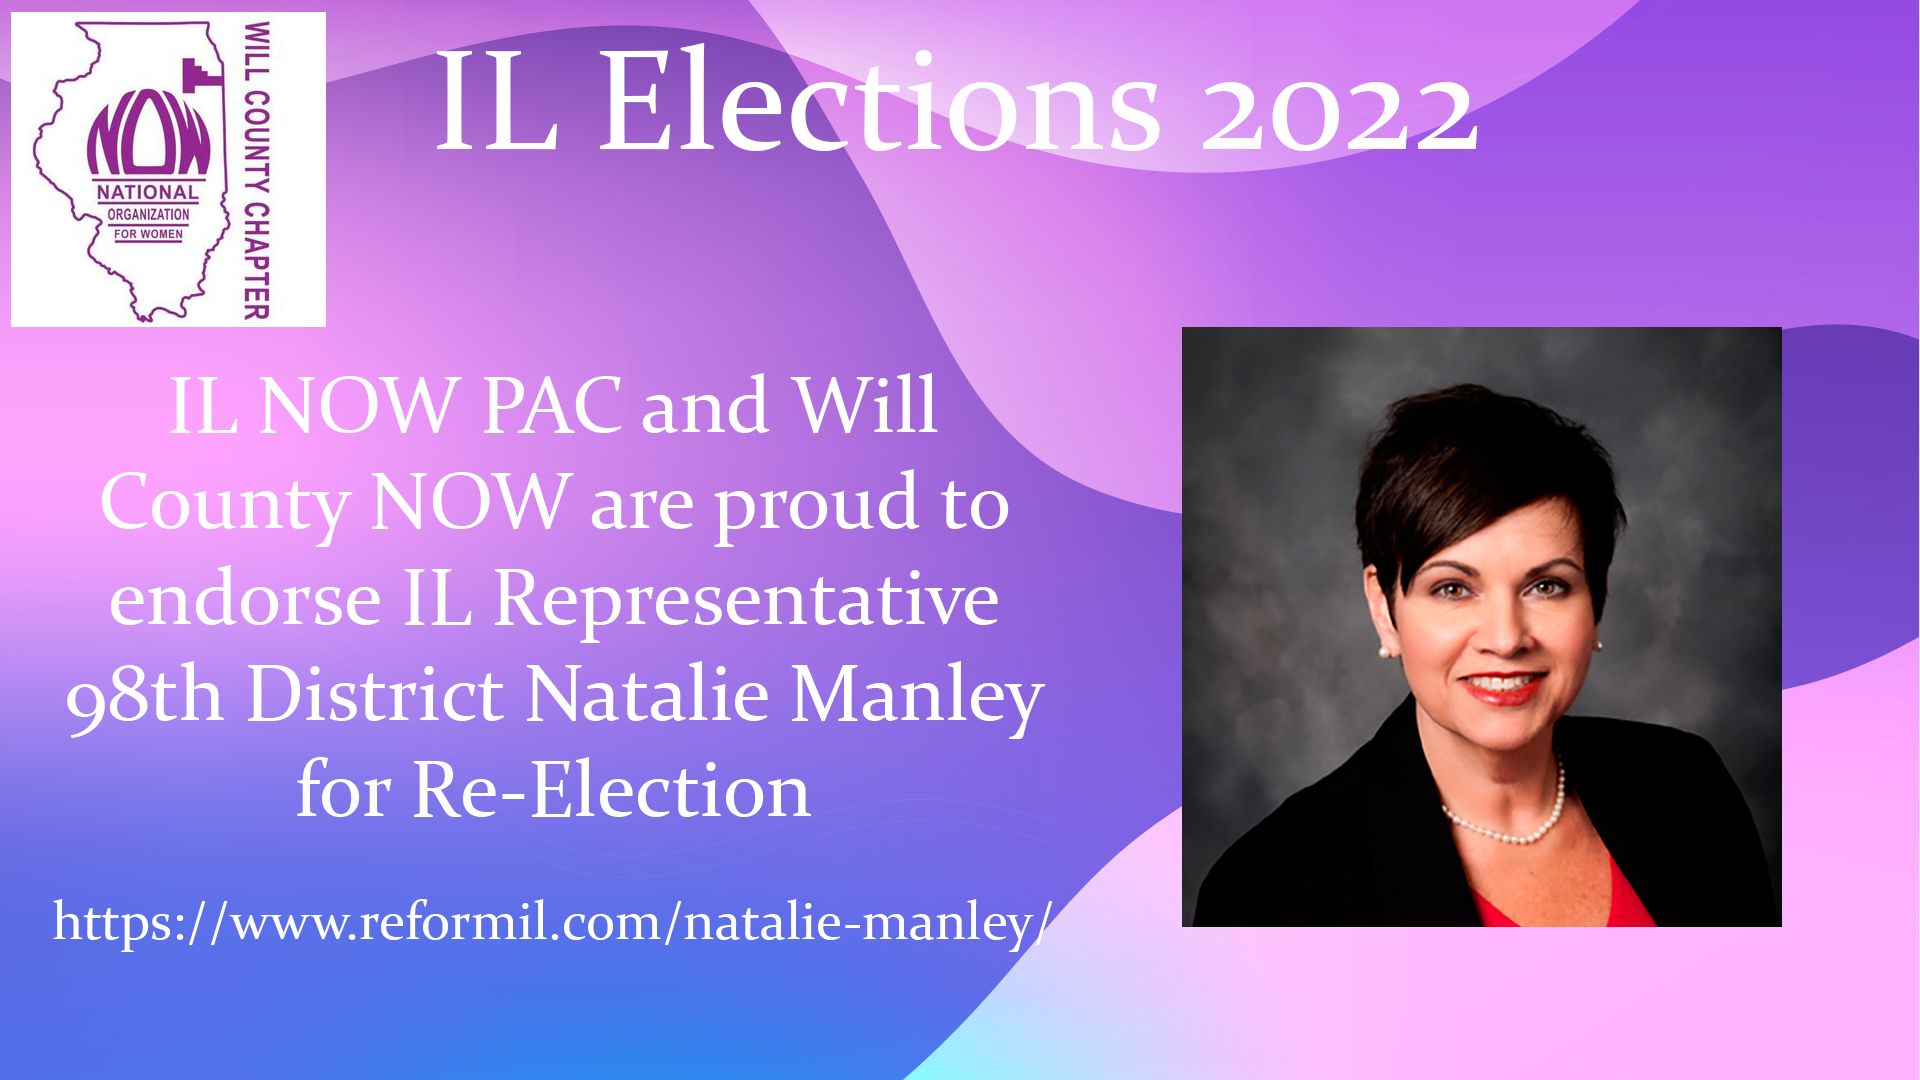 Will County NOW Endorses IL Representative 98th District Natalie Manley for Re-Election